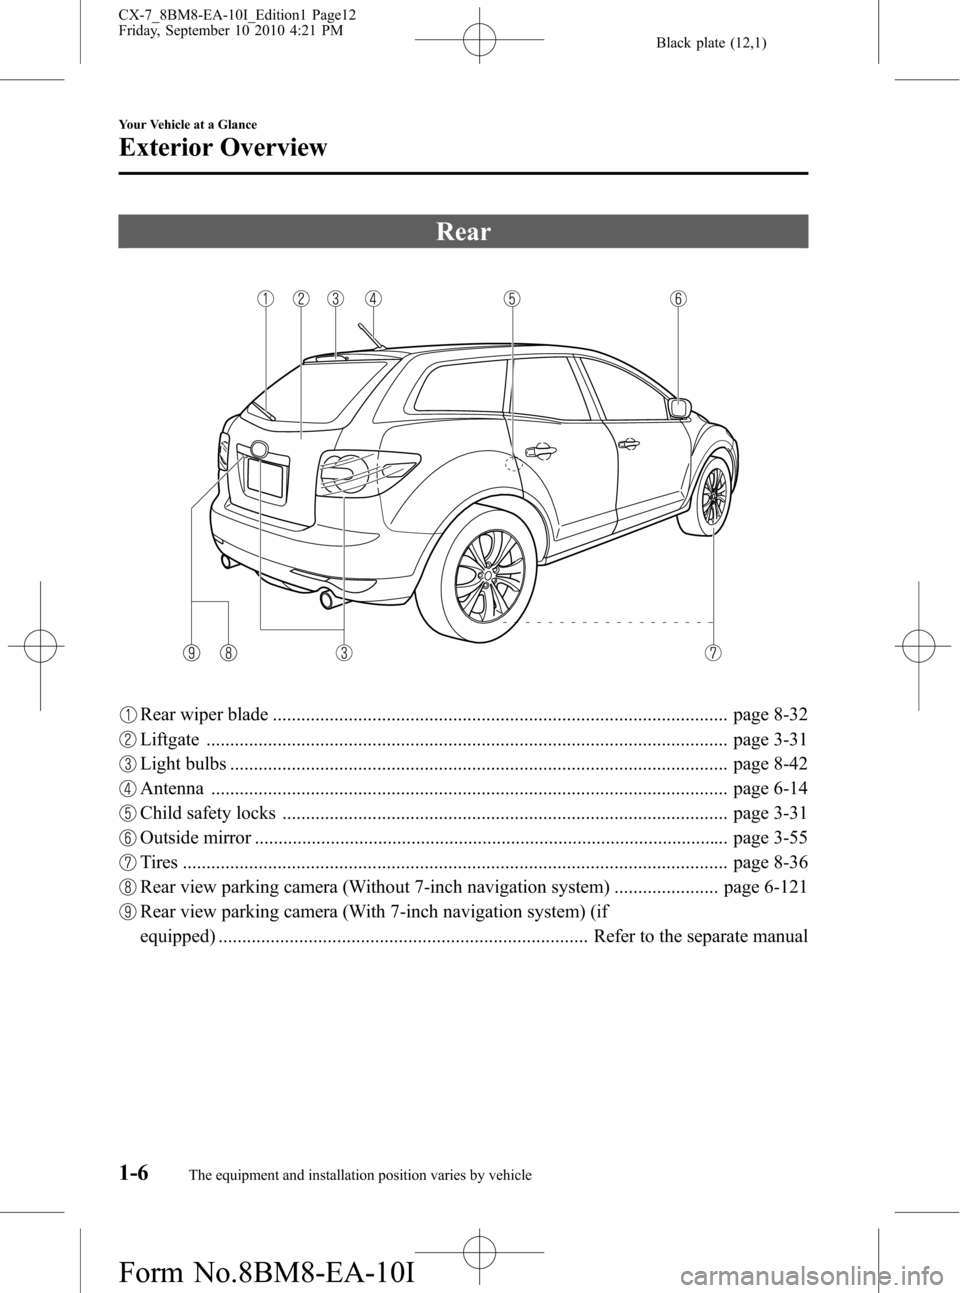 MAZDA MODEL CX-7 2011  Owners Manual (in English) Black plate (12,1)
Rear
Rear wiper blade ................................................................................................ page 8-32
Liftgate ...........................................